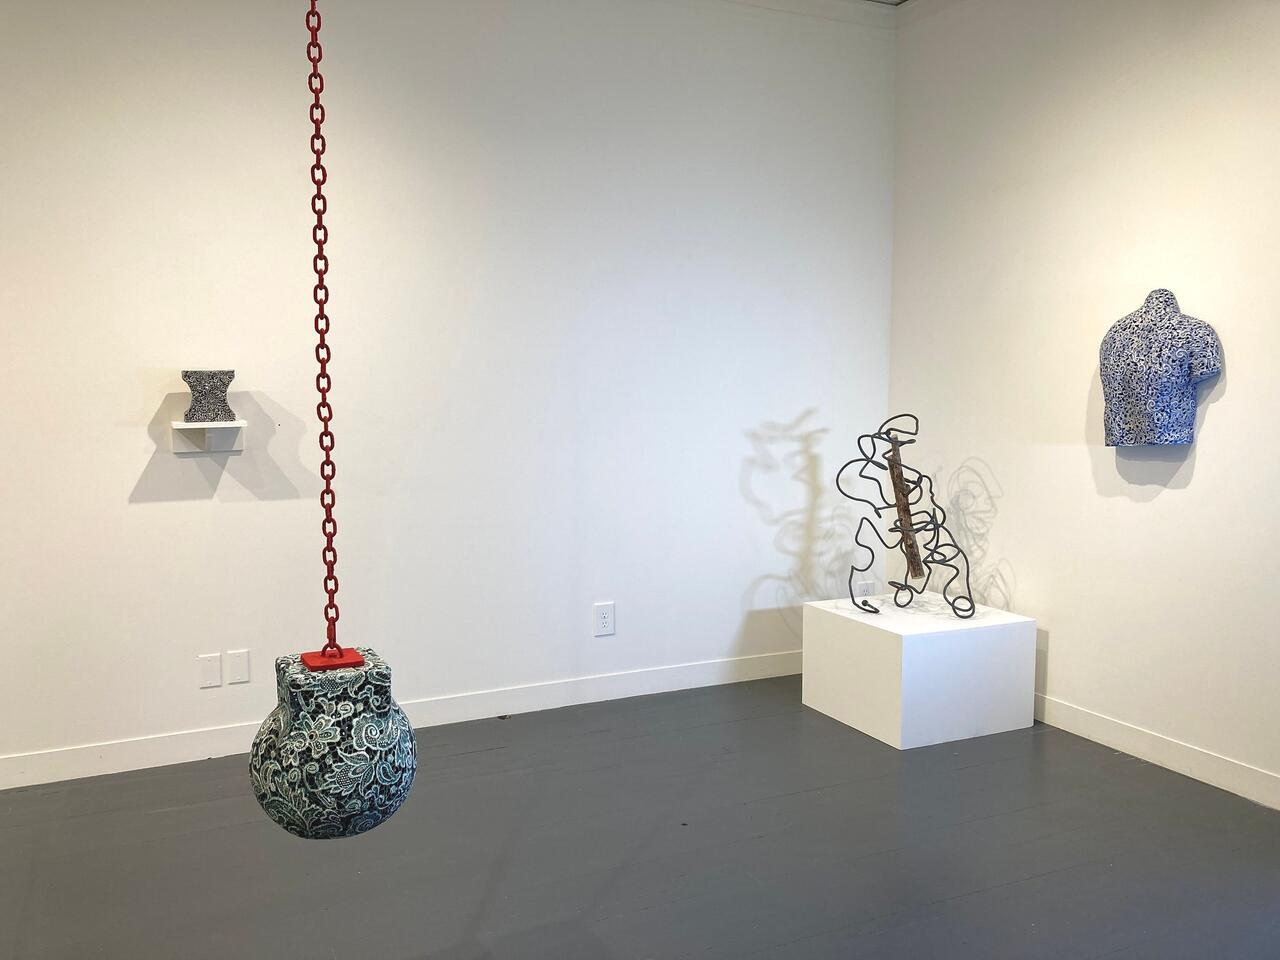 An image of an art installation, including a porcelain wrecking ball, a porcelain woman's chest, a porcelain vase on the wall, and a wire piece.